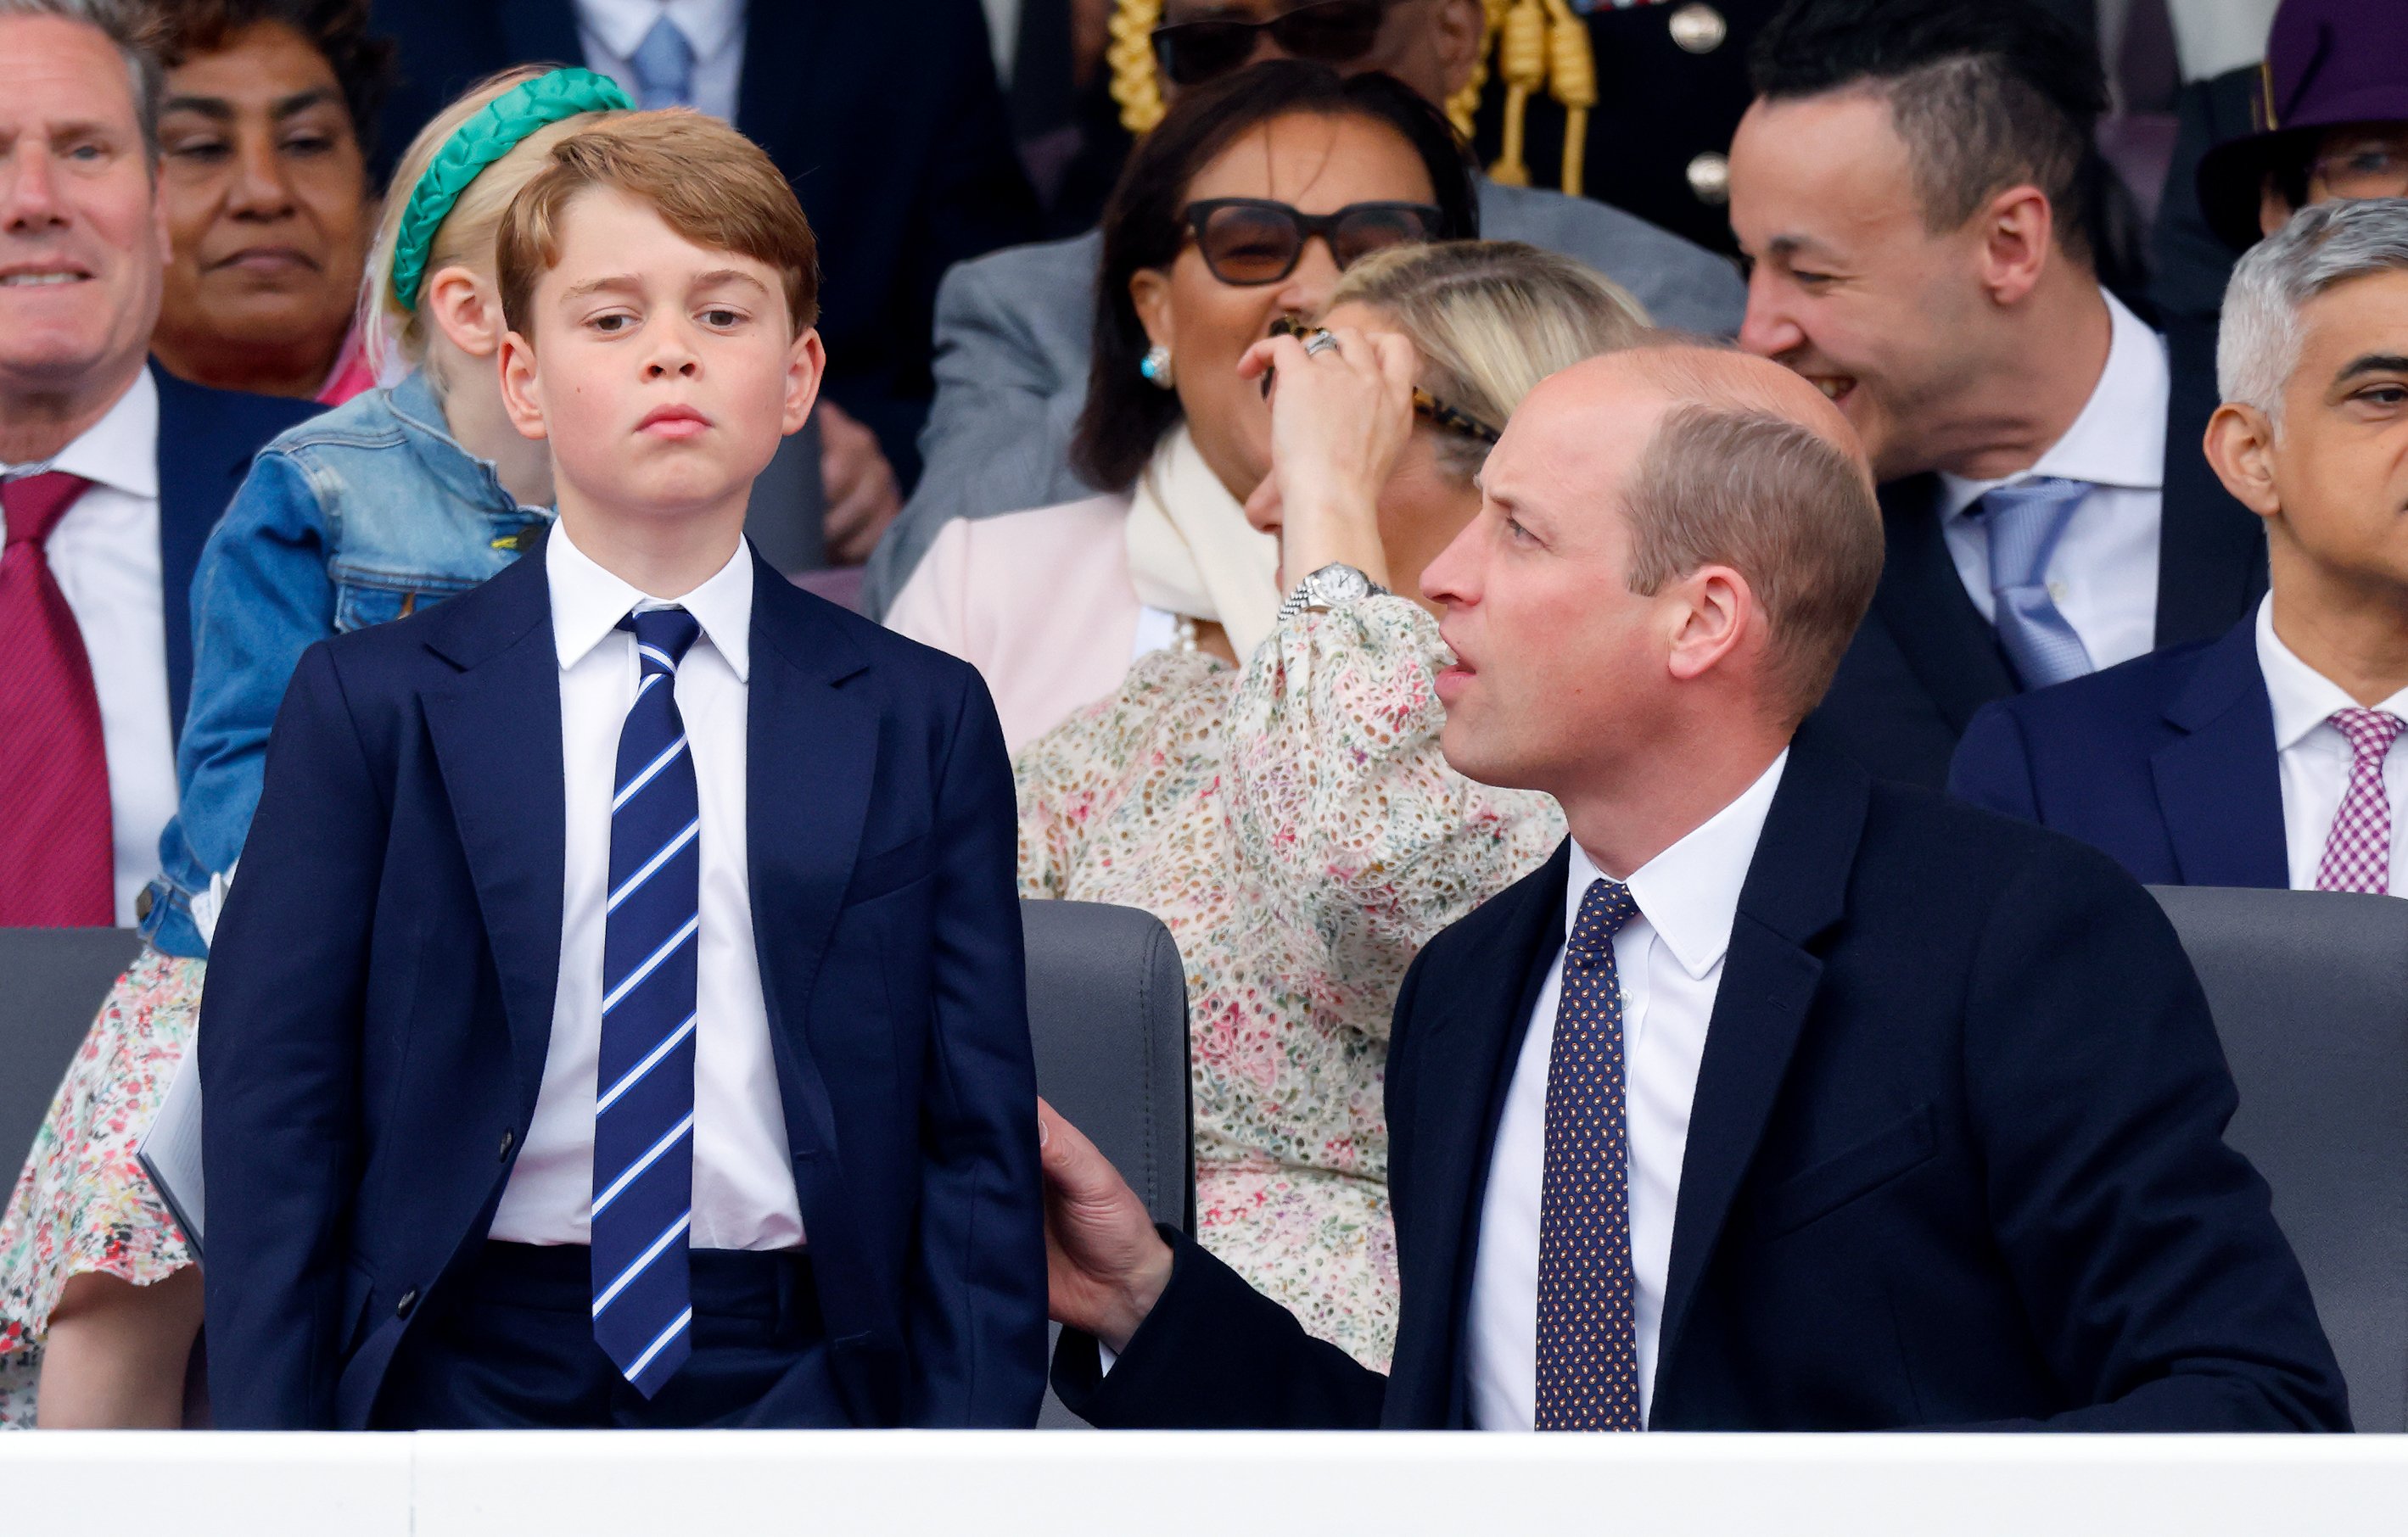 Prince George and Prince William at the Platinum Pageant on June 5, 2022 |  Source: Getty Images